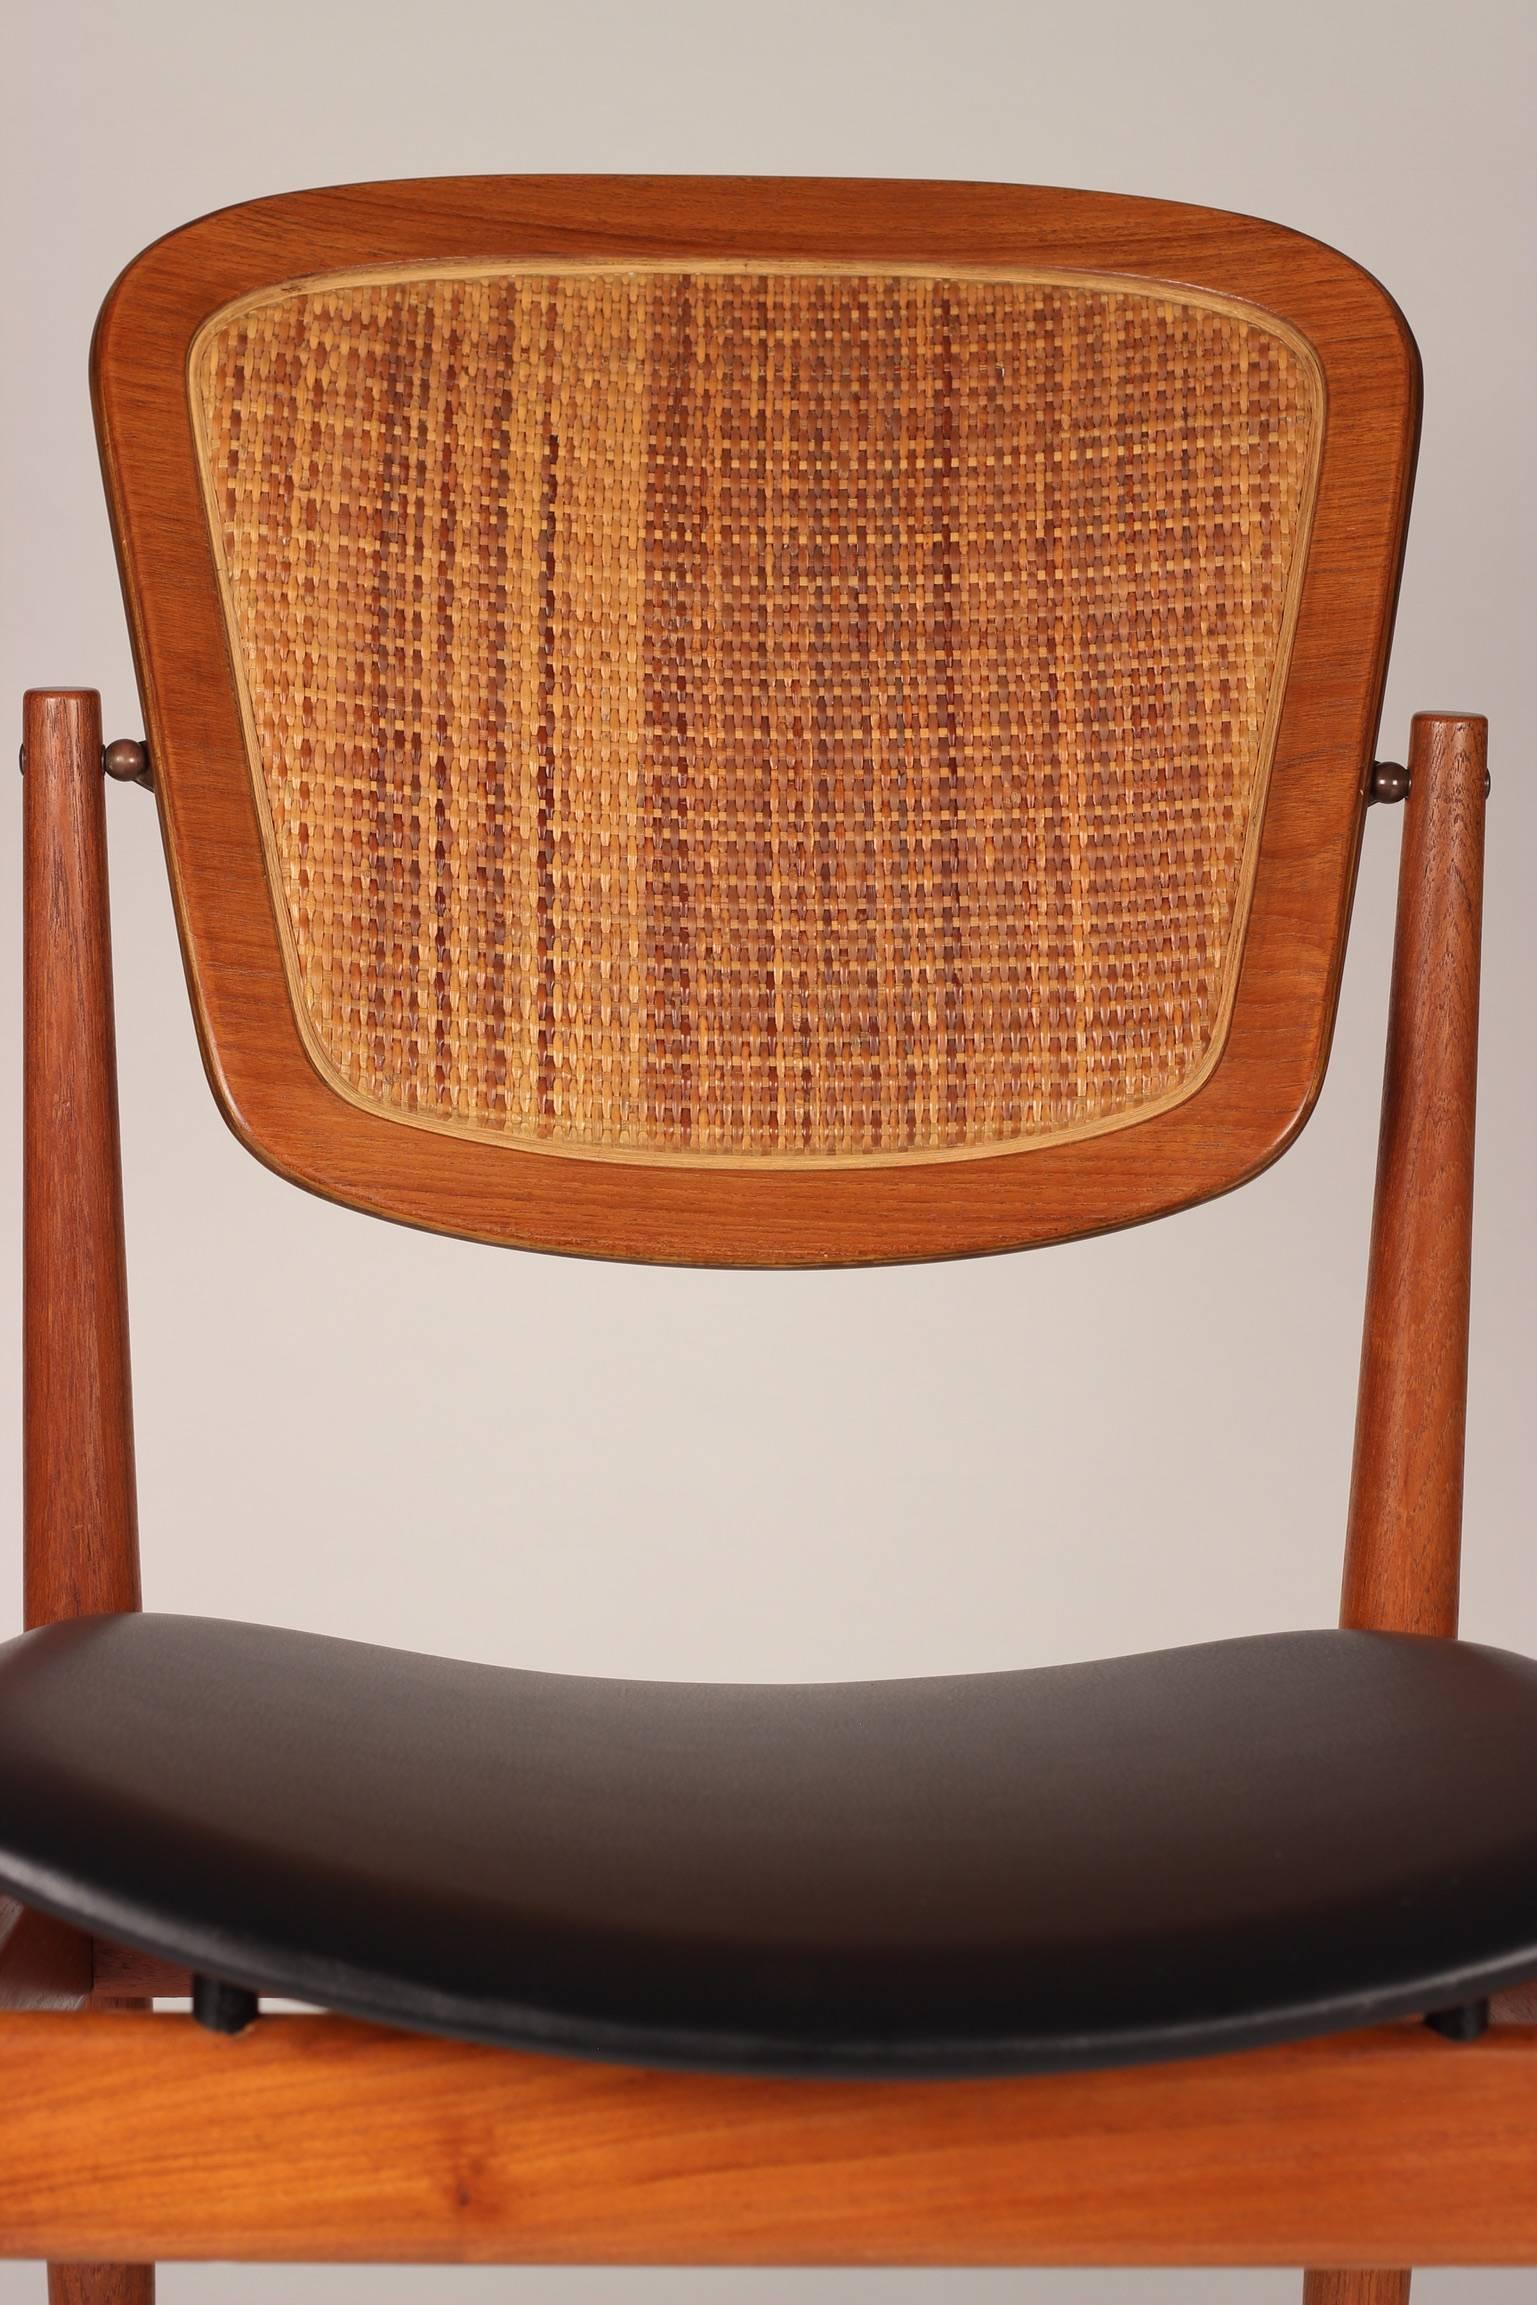 Hand-Woven Danish Desk Chair by Arne Vodder in Teak, Cane and Black Leather